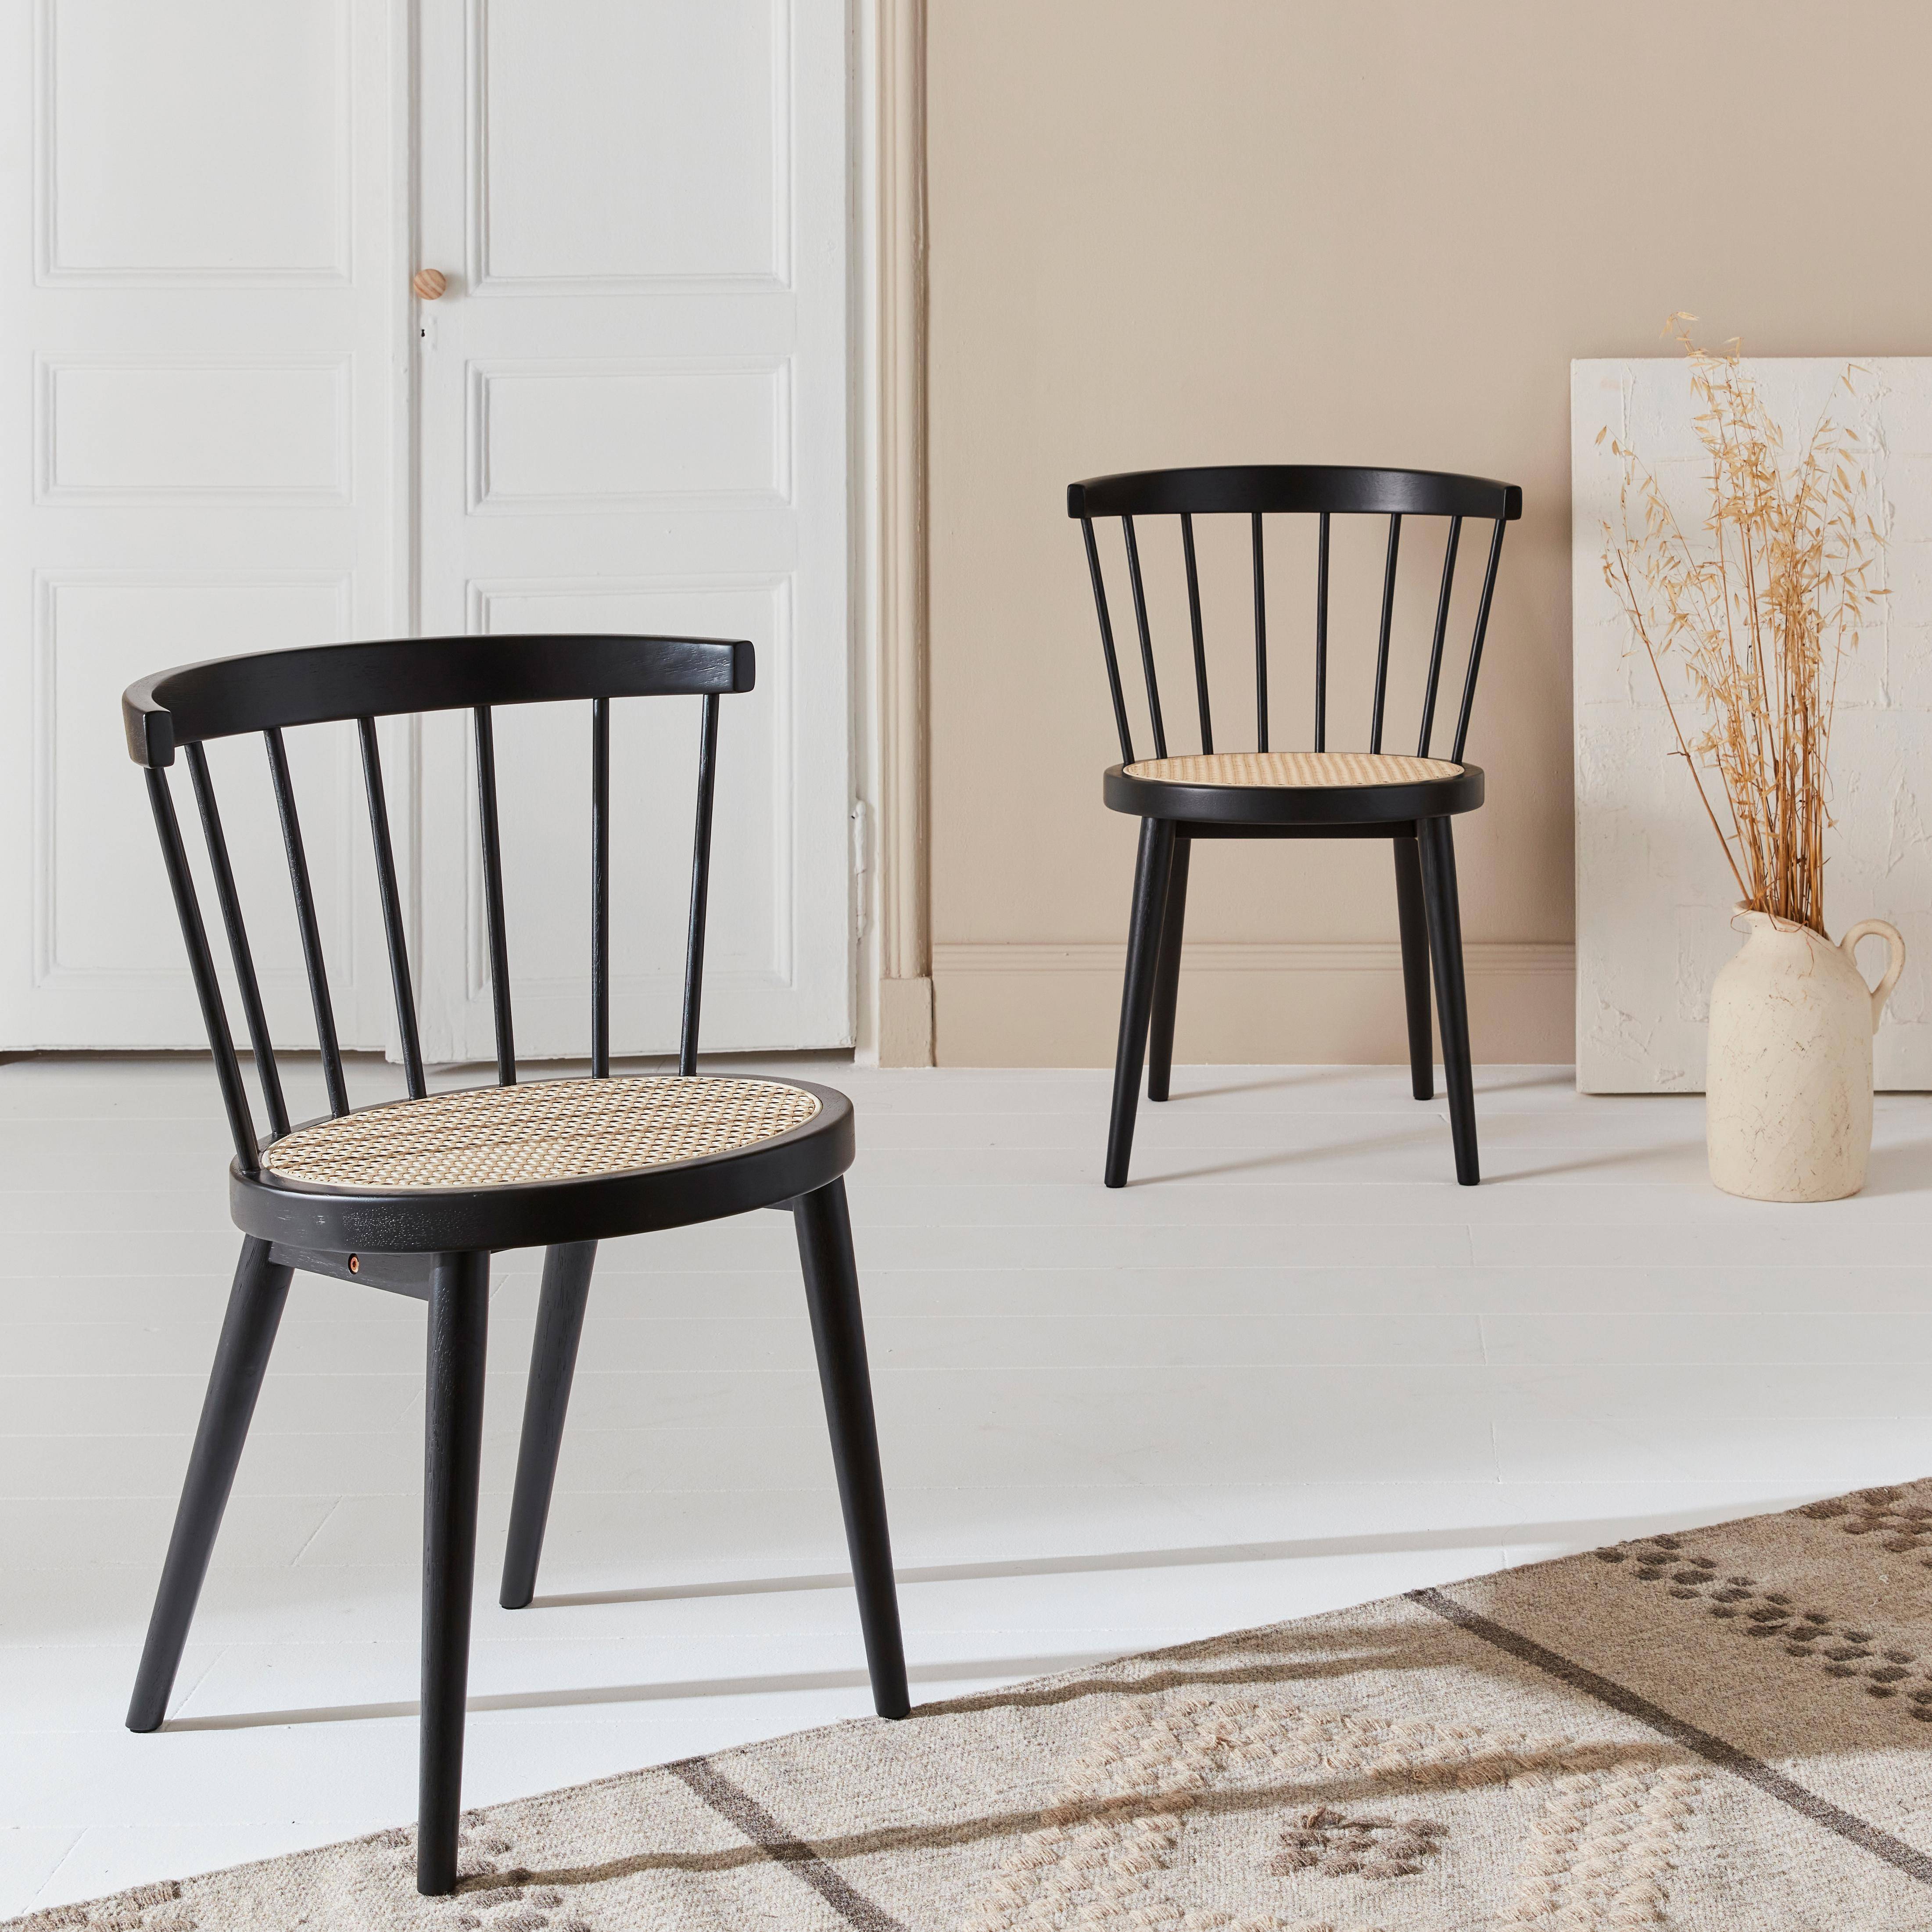 Pair of wood and cane dining chairs, W53 x D53.5 x H76cm, black Photo1